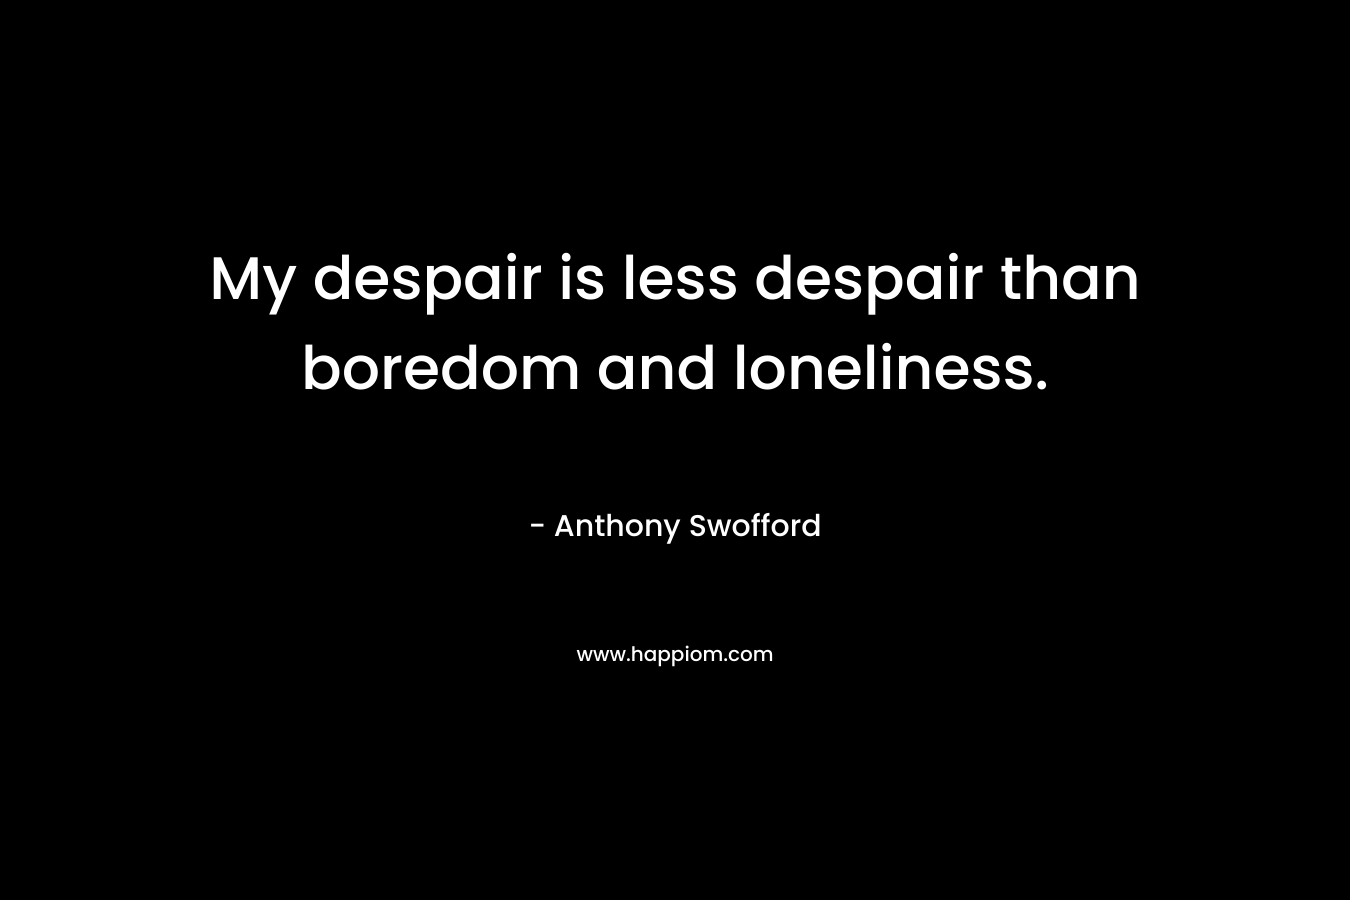 My despair is less despair than boredom and loneliness. – Anthony Swofford